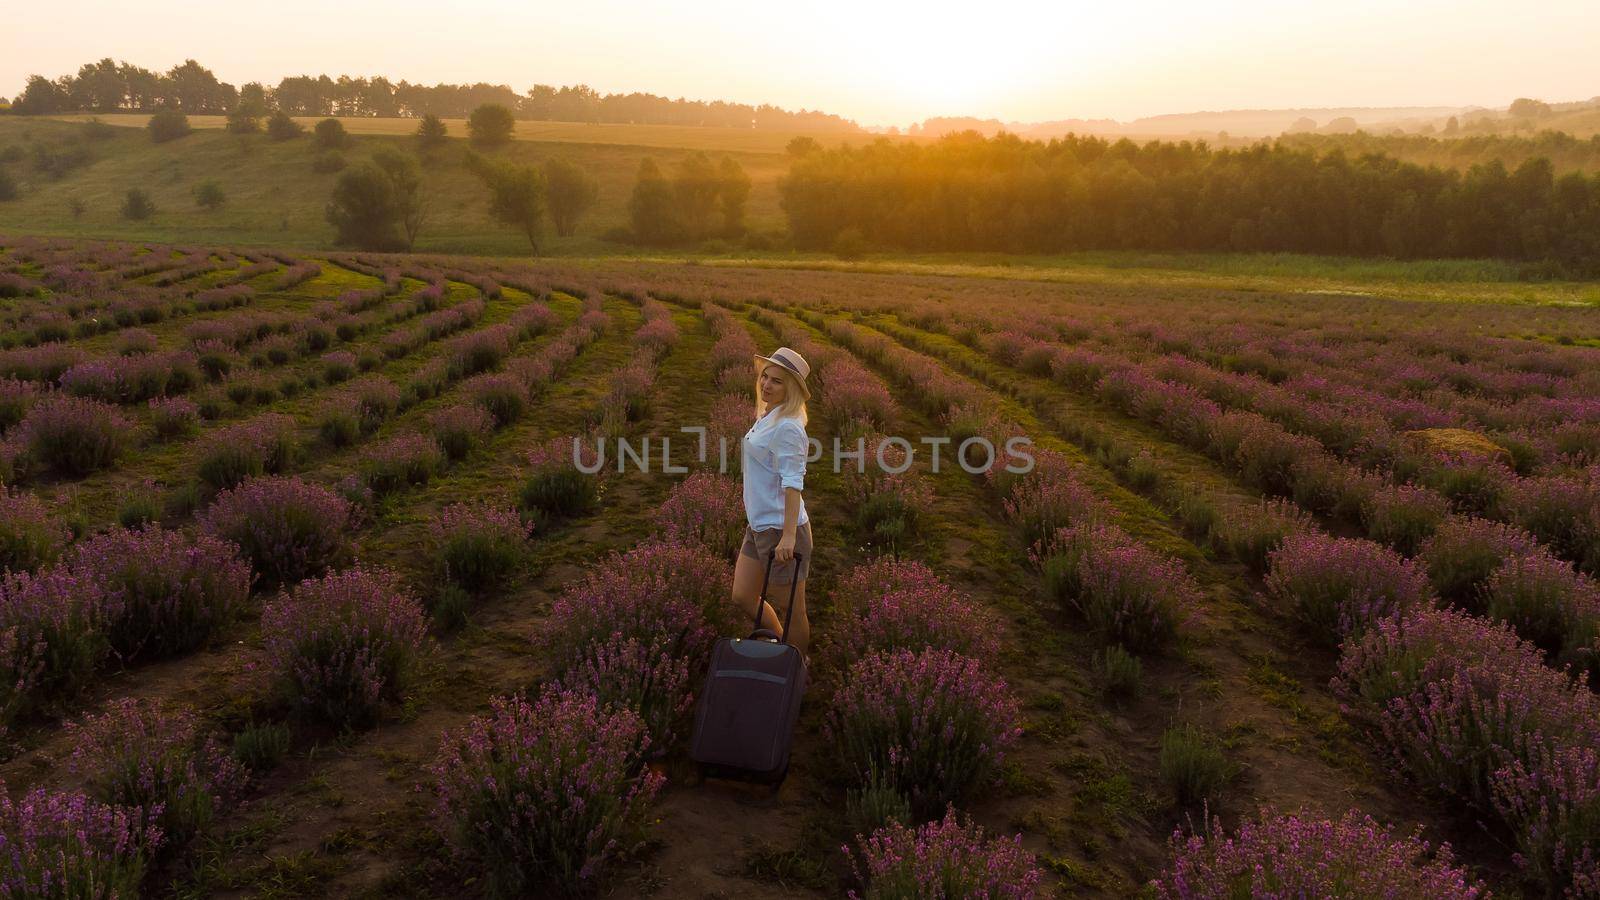 women with a suitcase and lavender field